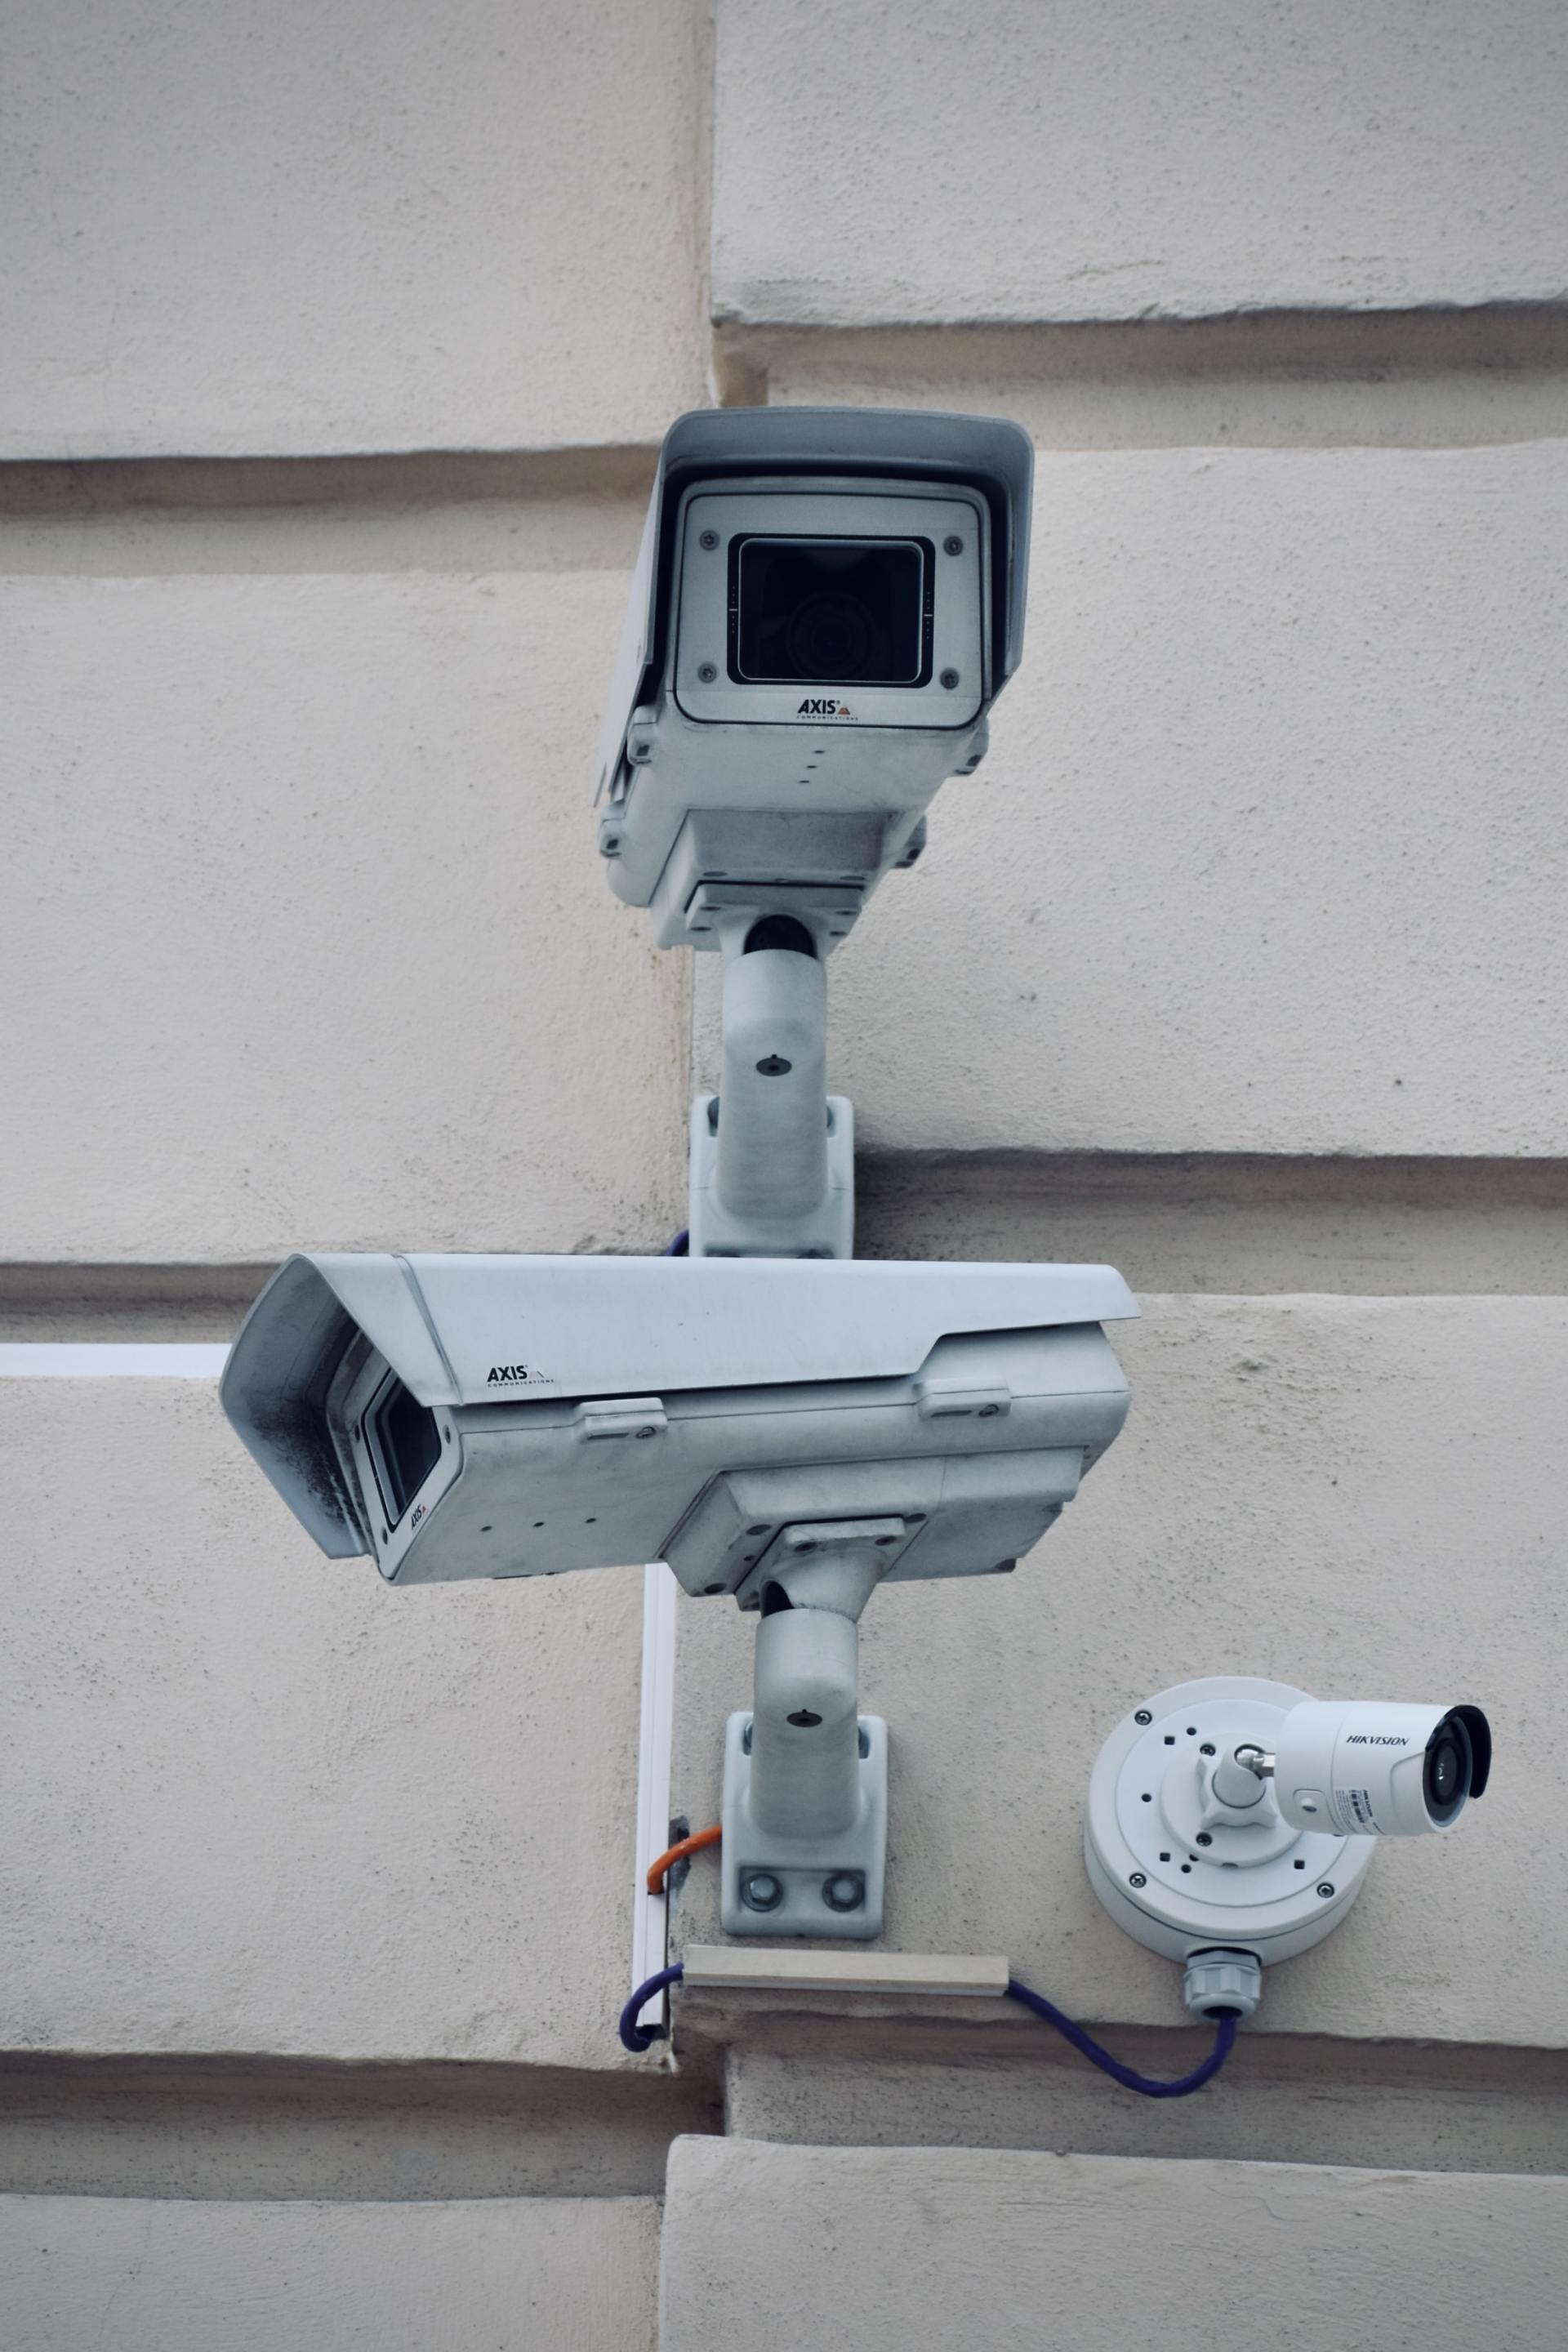 Security Cameras — Electronics Repairs In Hallidays Point, NSW